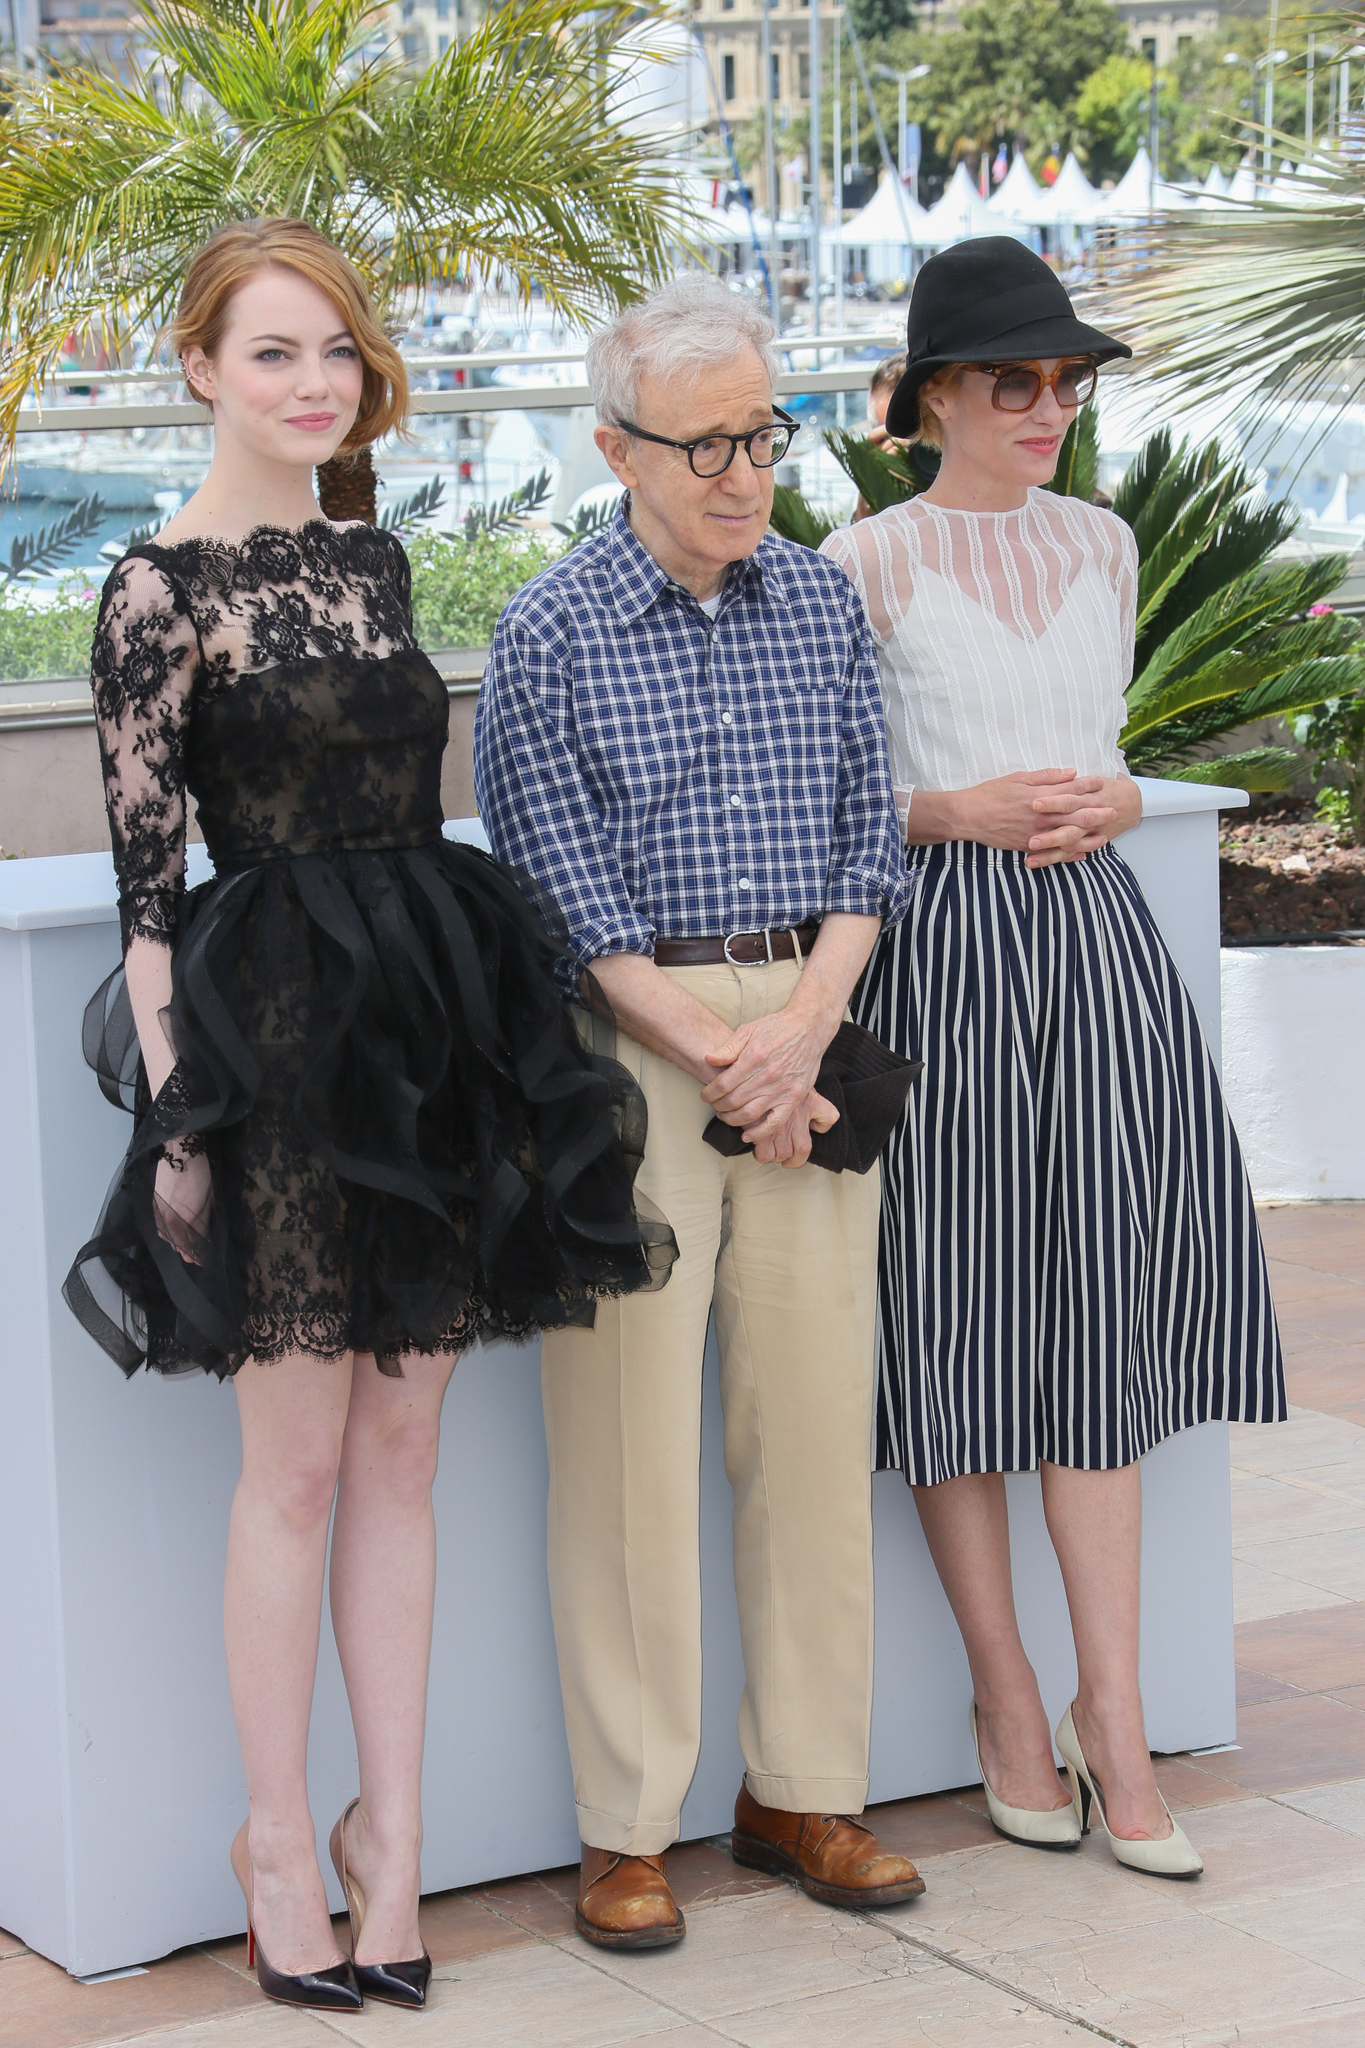 Woody Allen, Parker Posey and Emma Stone at event of Neracionalus zmogus (2015)